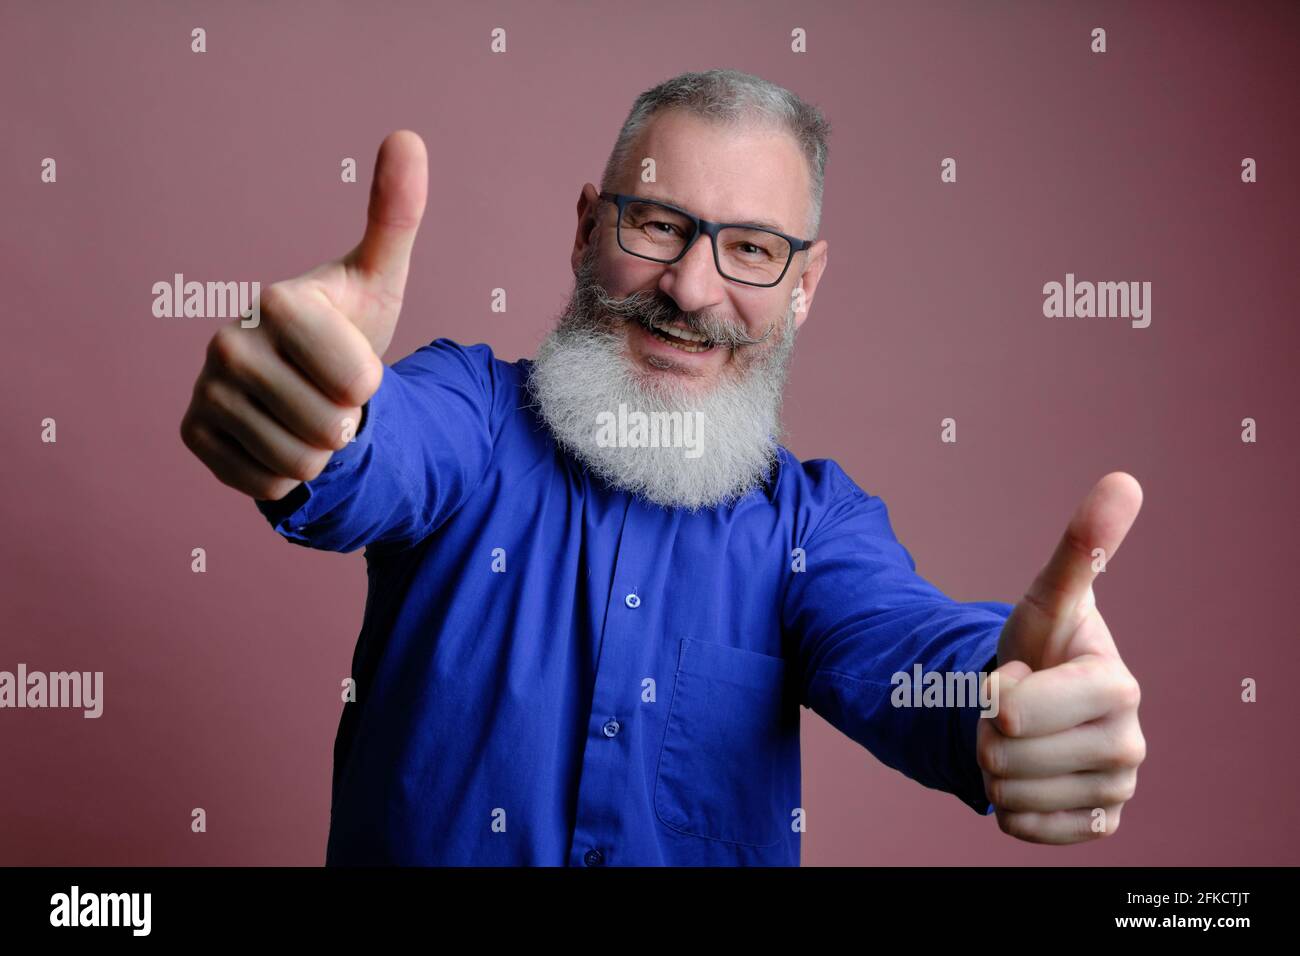 Portrait of mature bearded man dressed blue shirt gesturing thumbs up over pink background, caucasian man with beard smiling Stock Photo